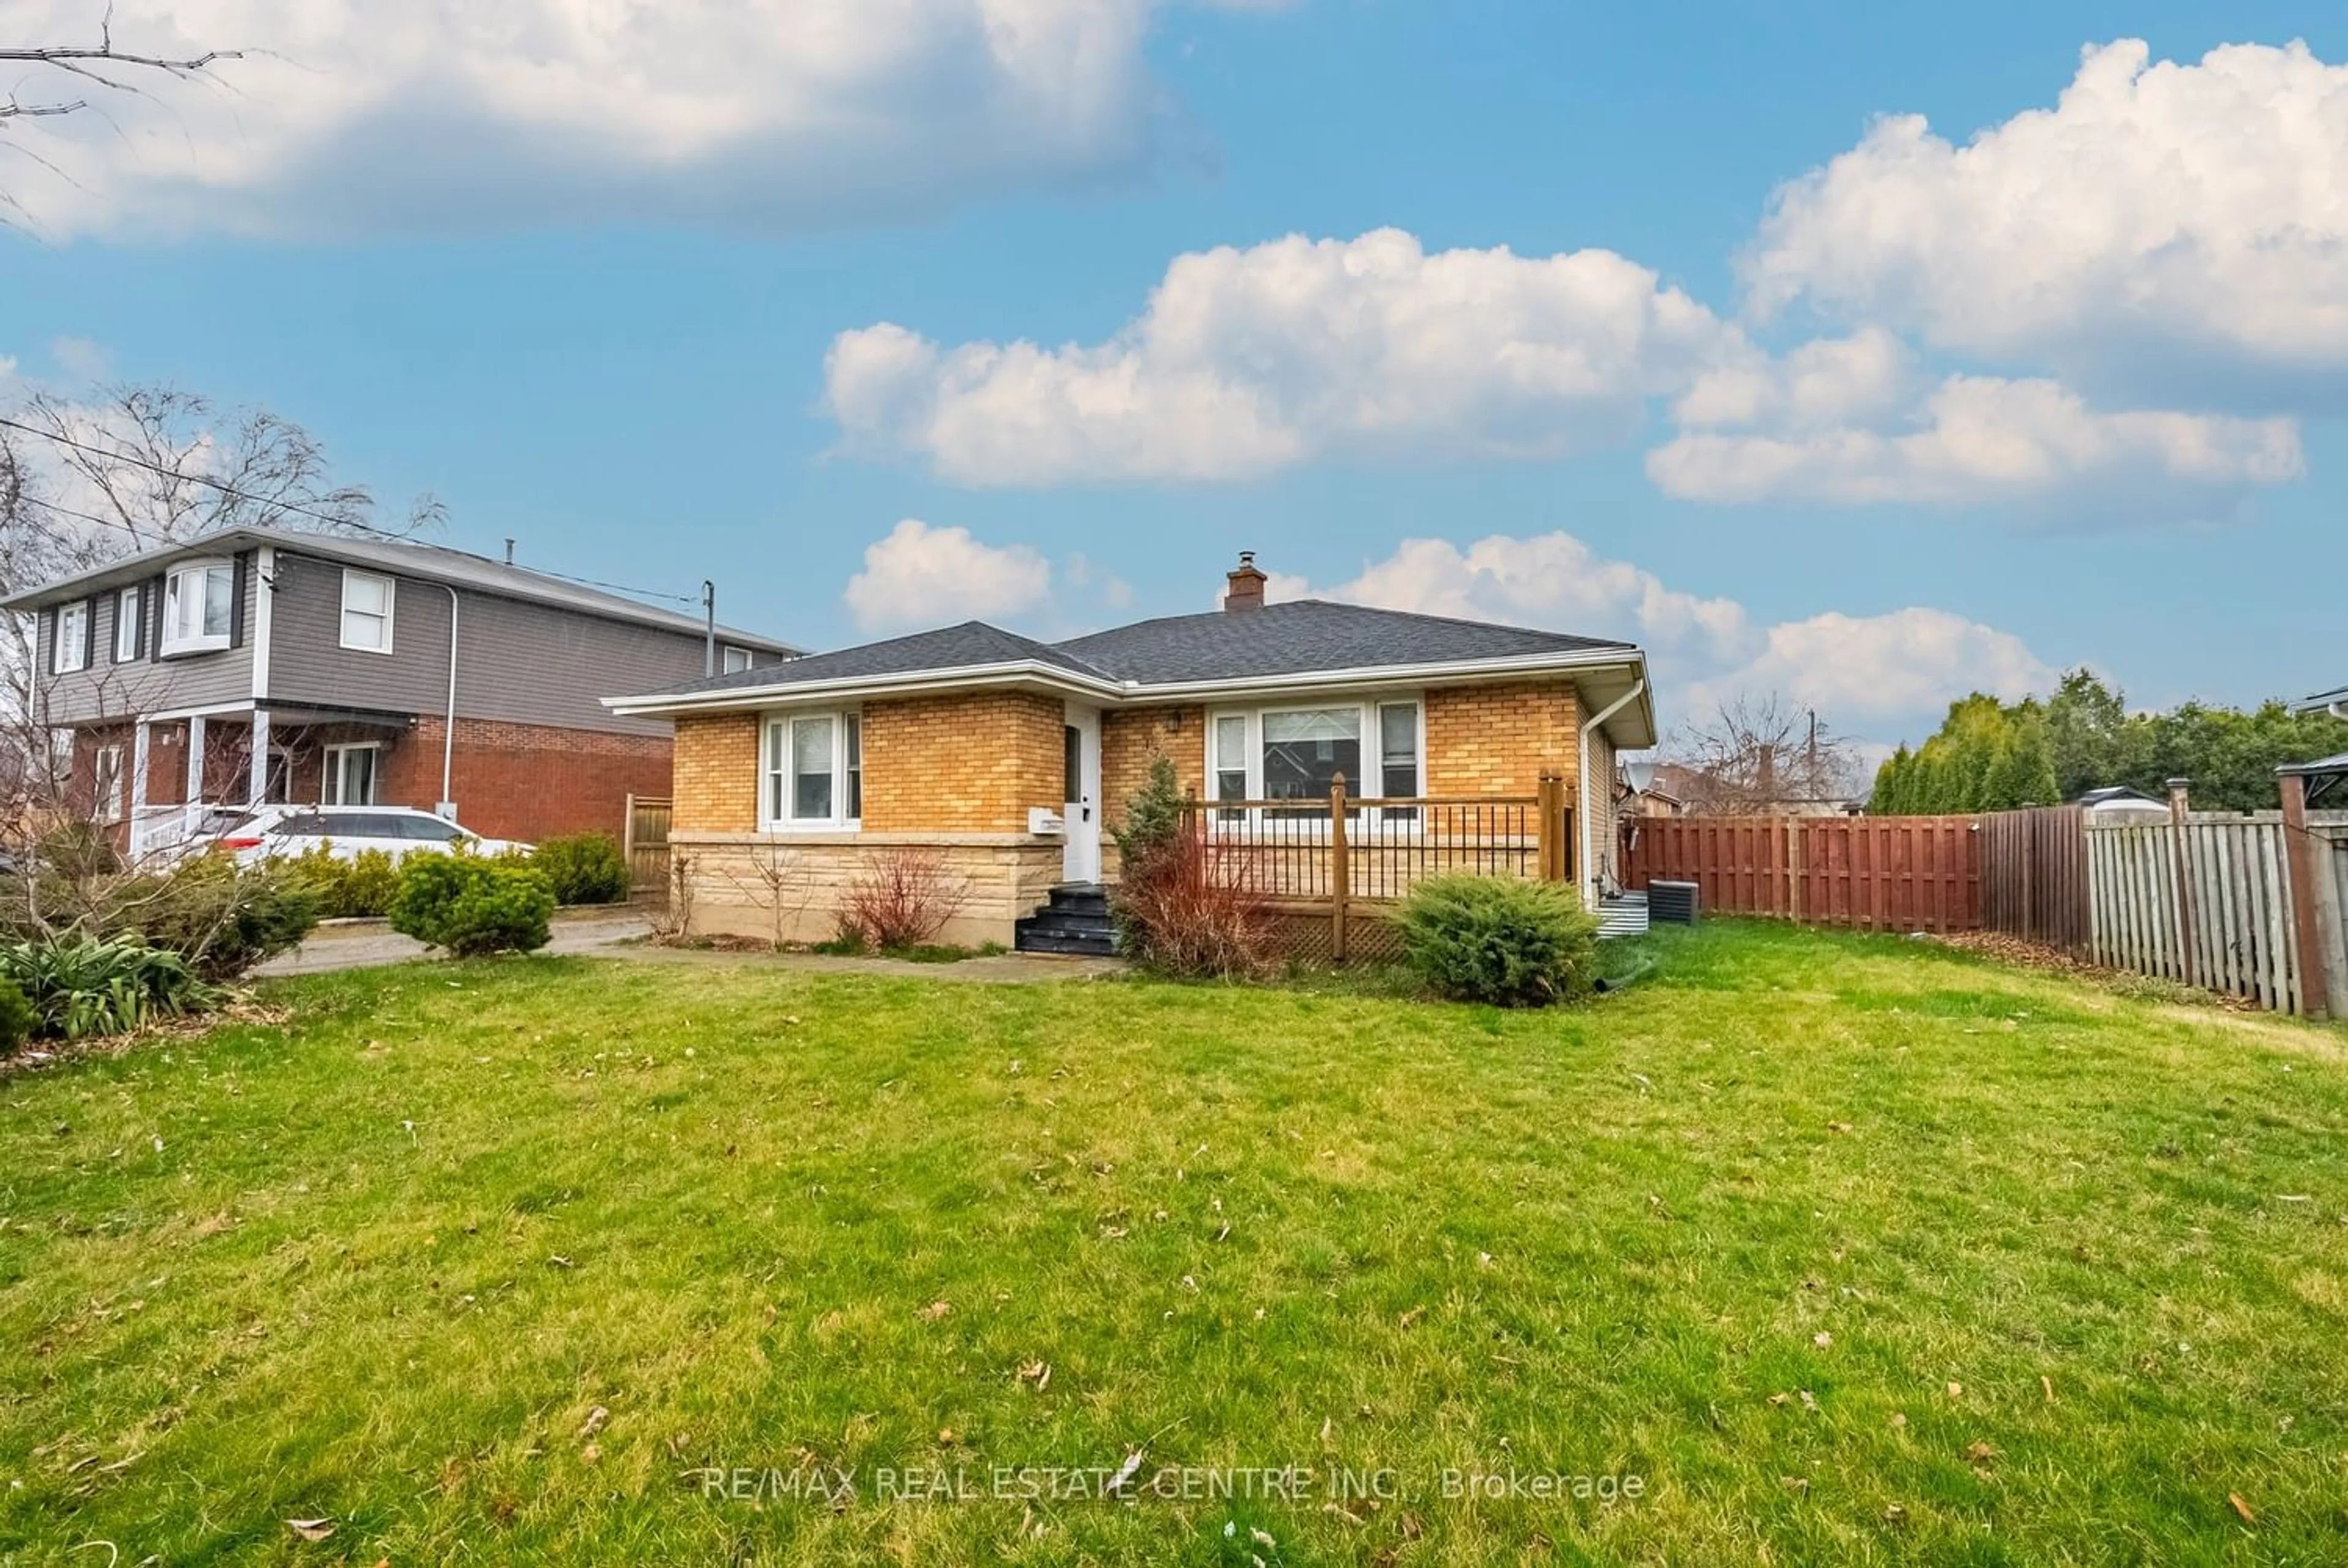 Frontside or backside of a home for 126 Haig St, St. Catharines Ontario L2R 6L2